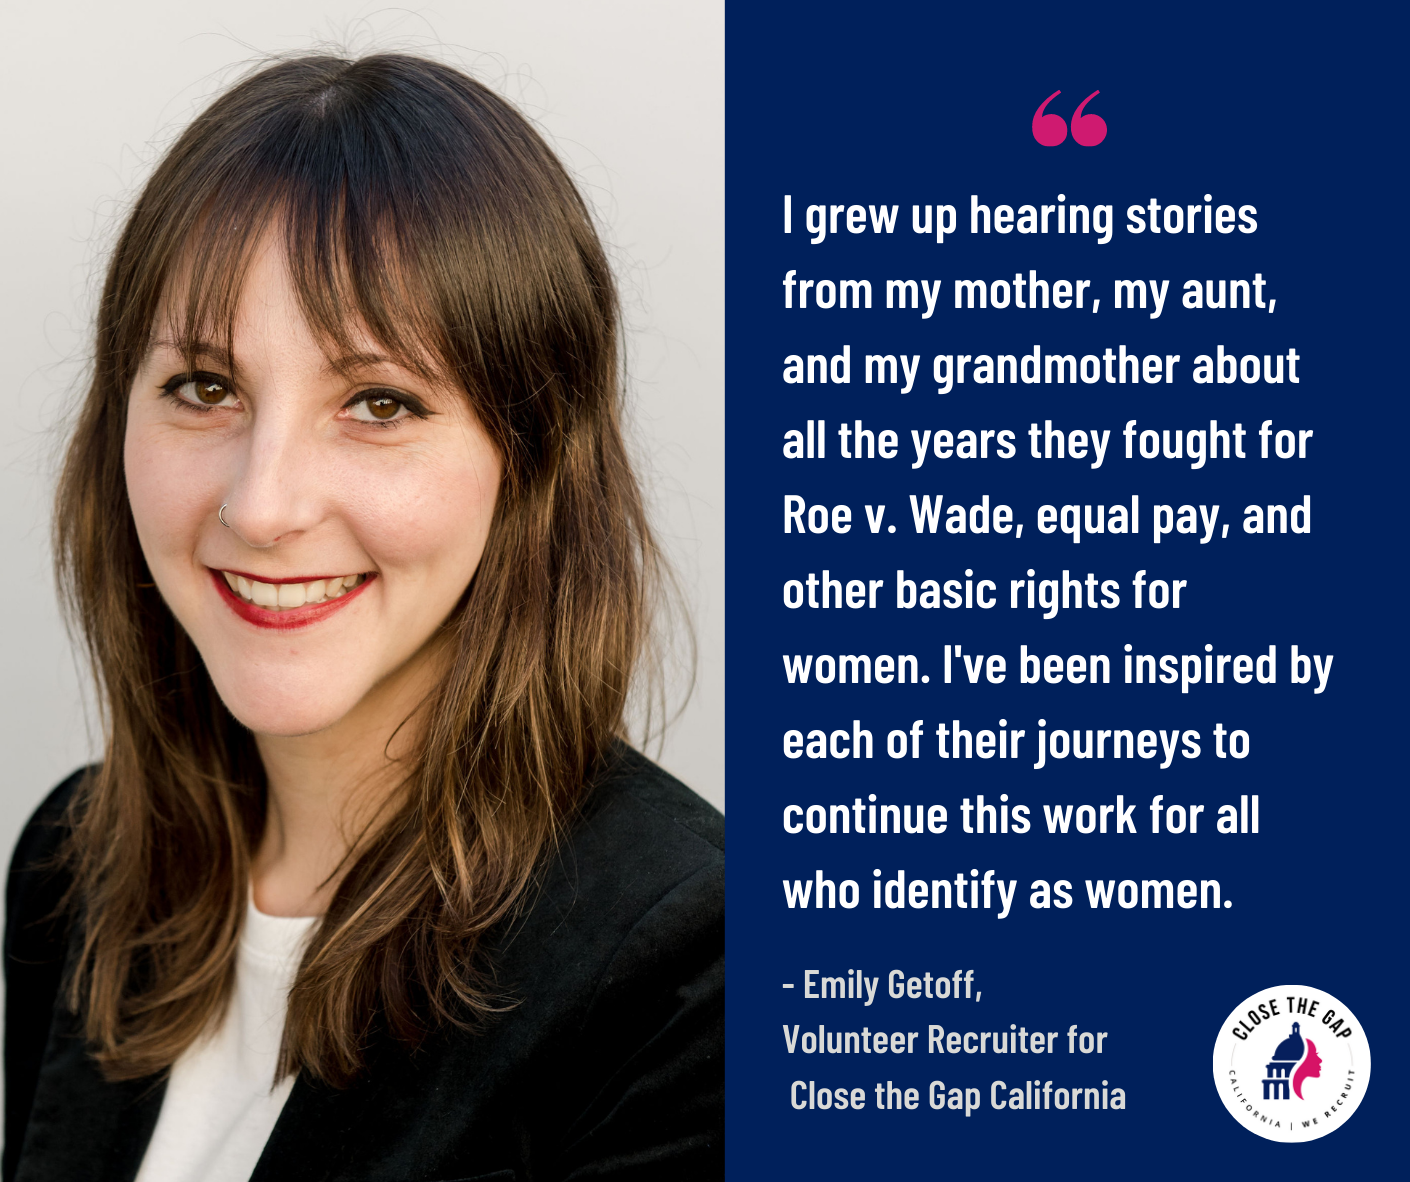 ''I grew up hearing stories from my mother, my aunt, and my grandmother about all the years they fought for Roe v. Wade, equal pay, and other basic rights for women. I've been inspired by each of their journeys to continue this work for all who identify as women.''  - Volunteer Recruiter Emily Getoff